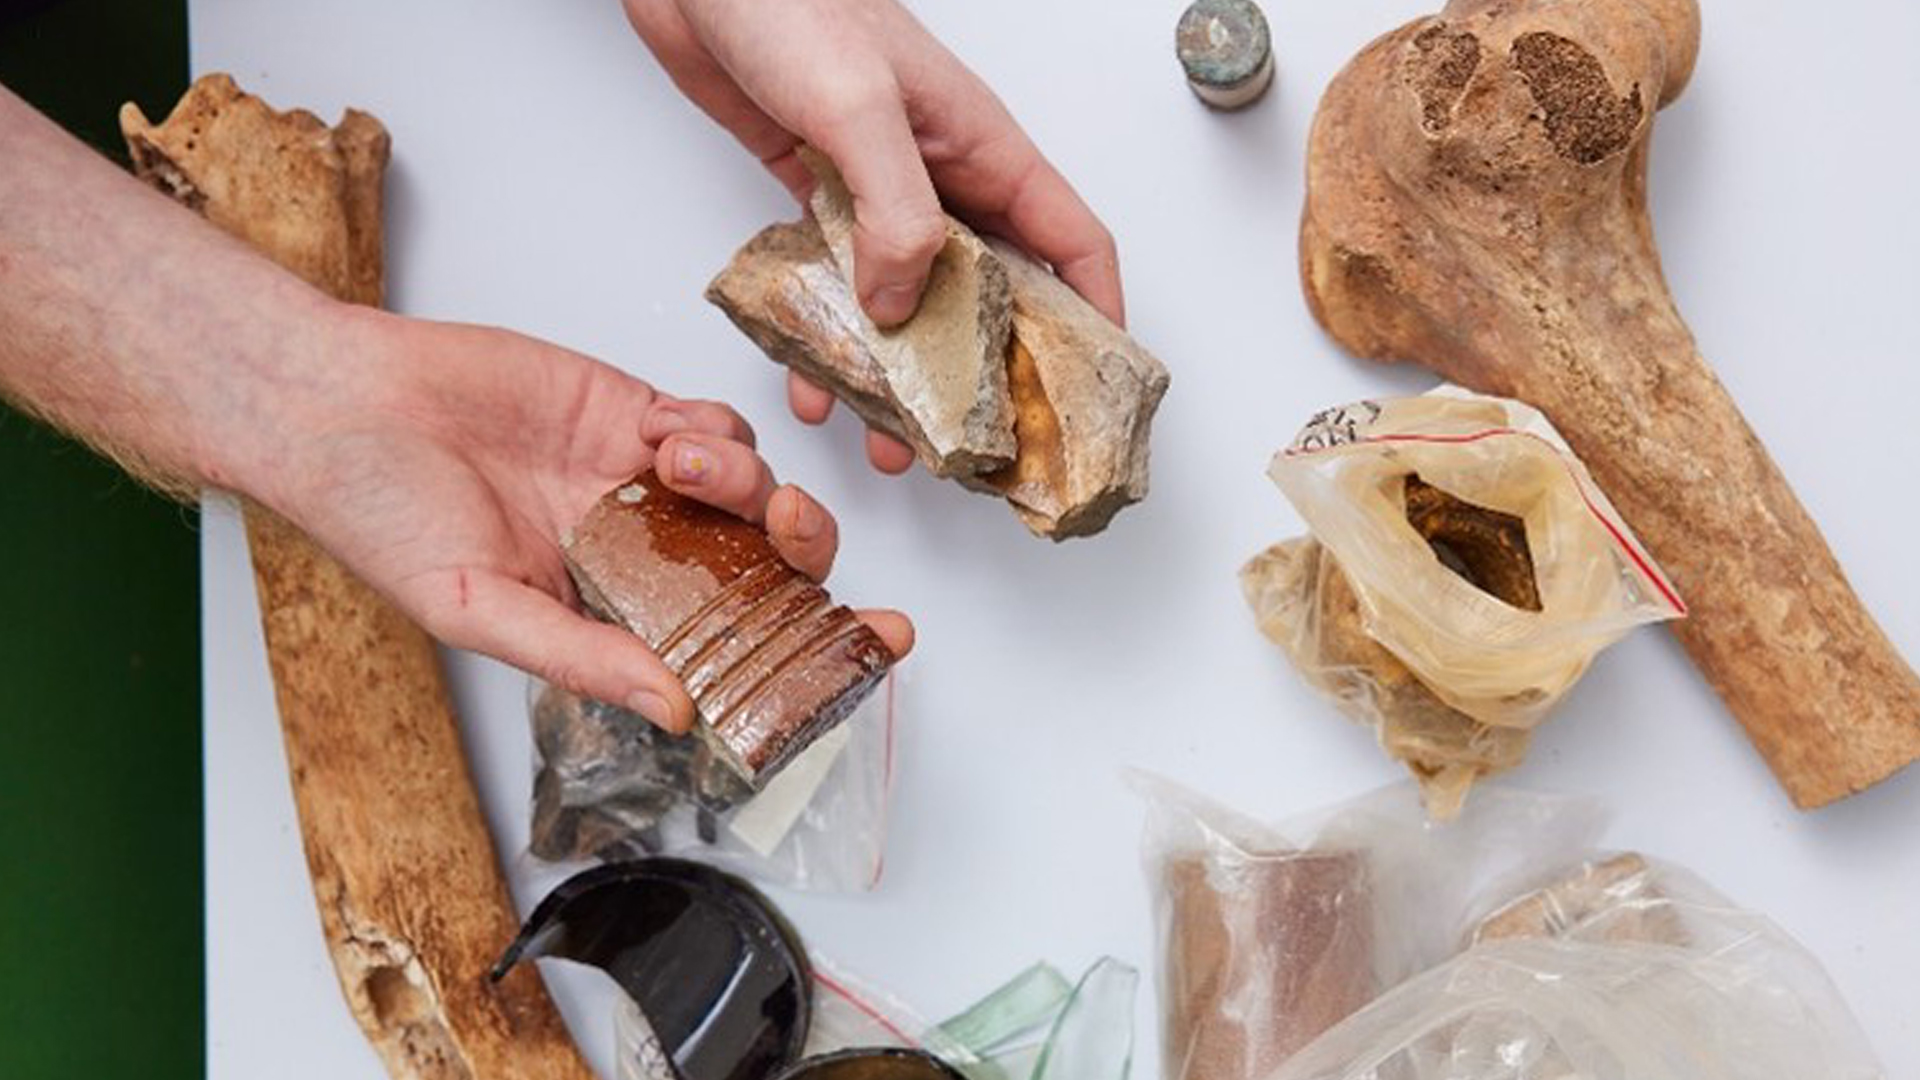 Top-down view of two hands holding some archaeological items over a table with more items